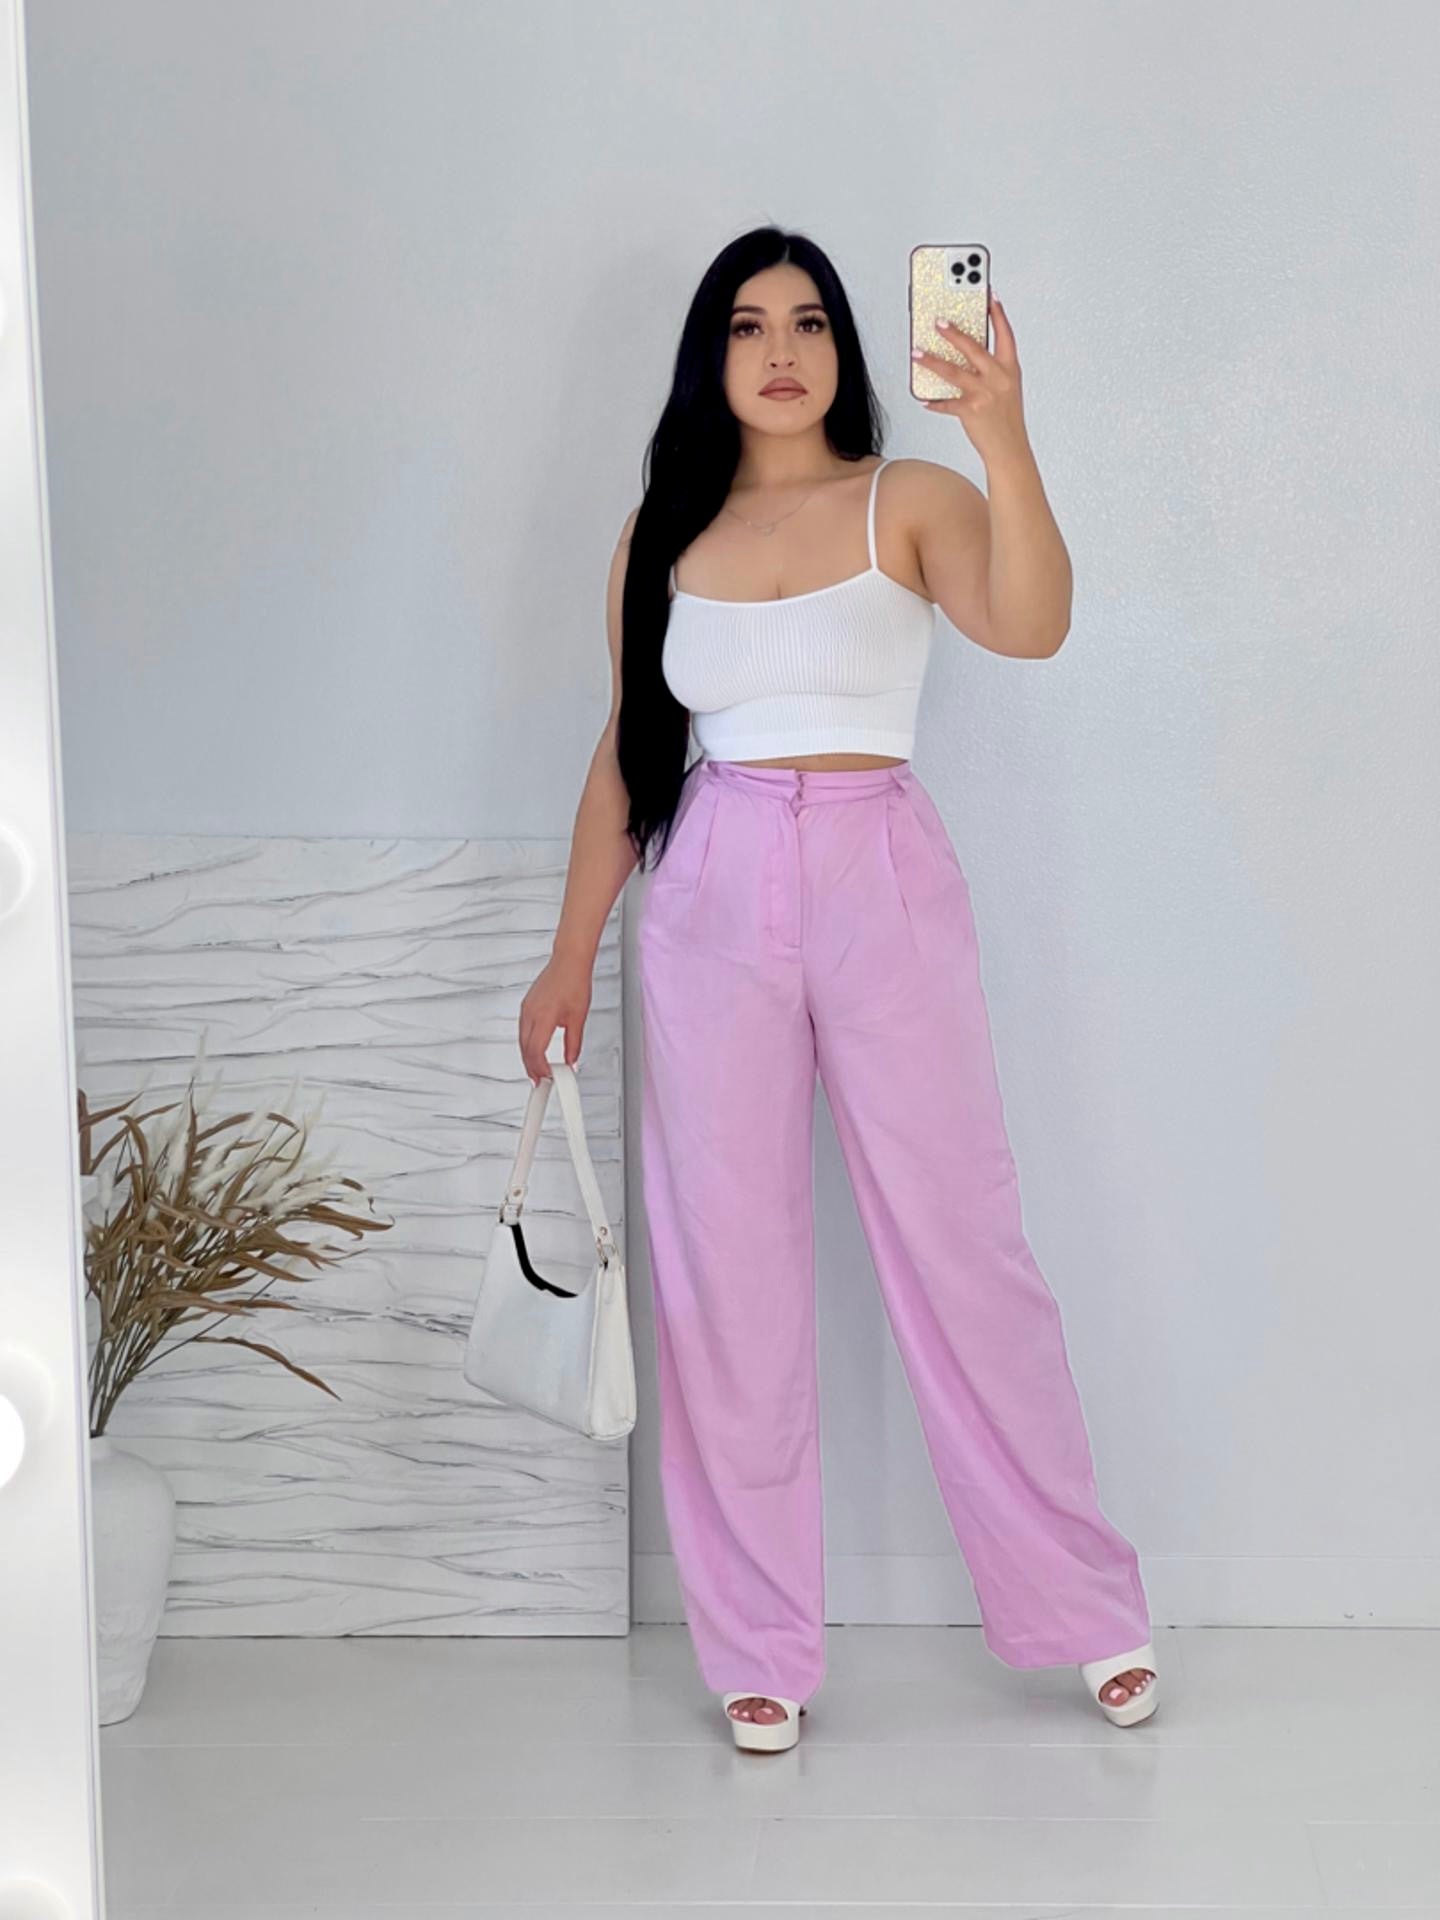 Girlfriend Light Pink Satin Pants - Style Baby OMG Fashion Boutique - Stylebabyomg - Buy - Aesthetic Baddie Outfits - Babyboo - OOTD - Shie 